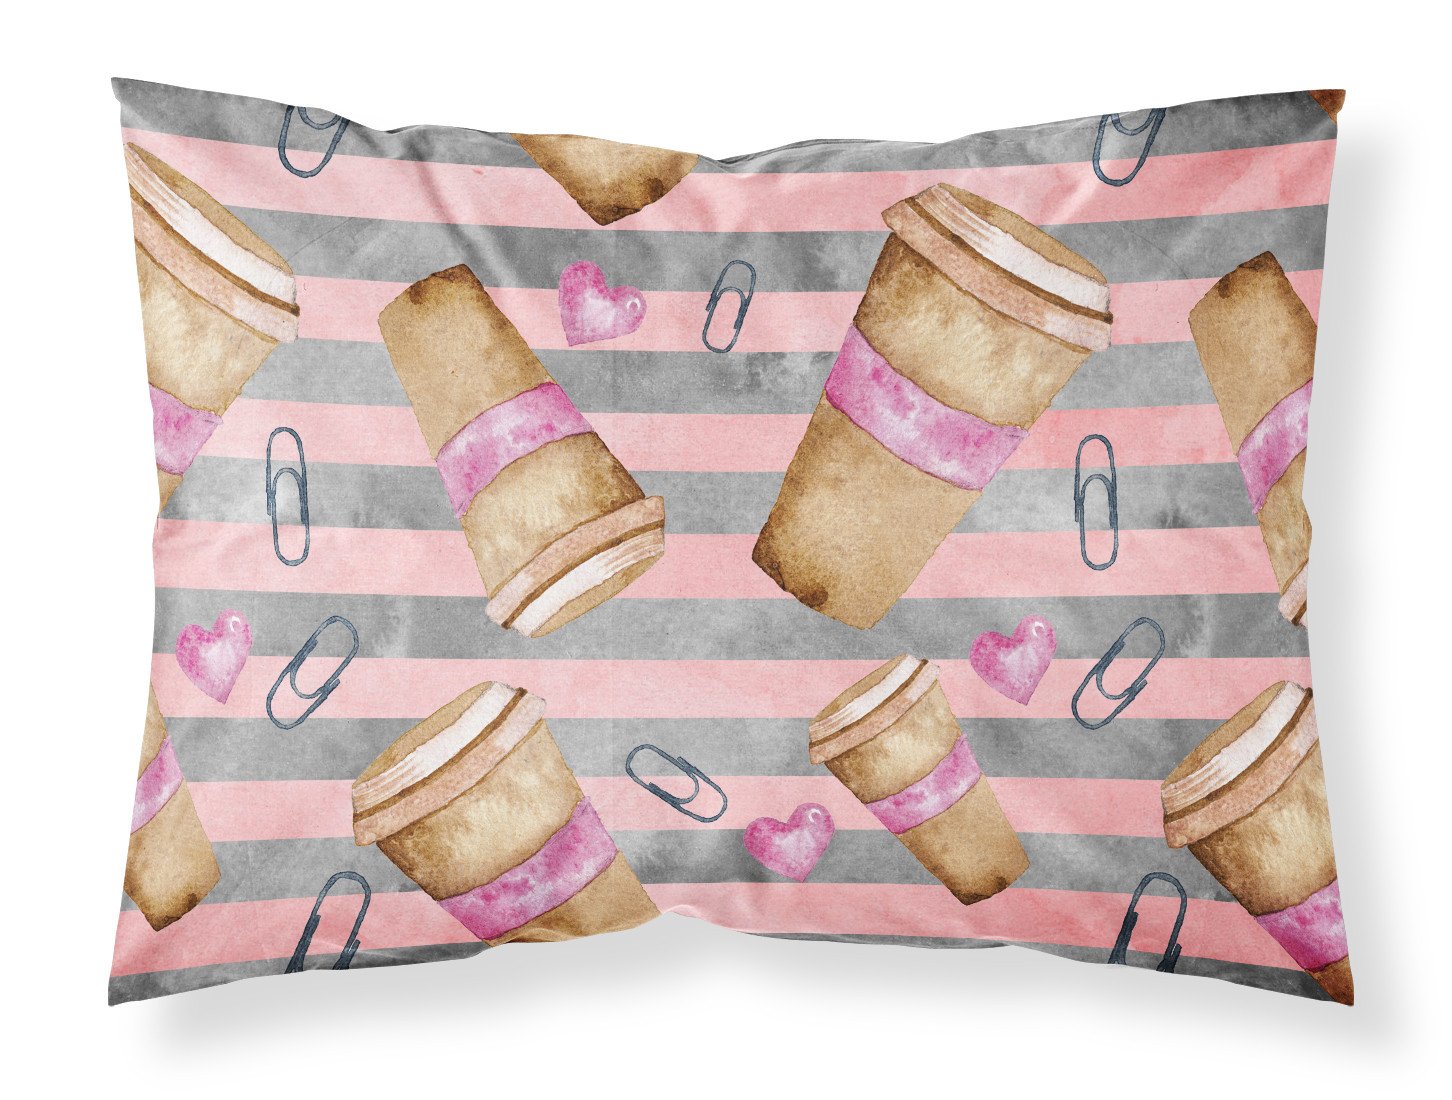 Watercolor Coffee and Paper Clips Fabric Standard Pillowcase BB7538PILLOWCASE by Caroline's Treasures